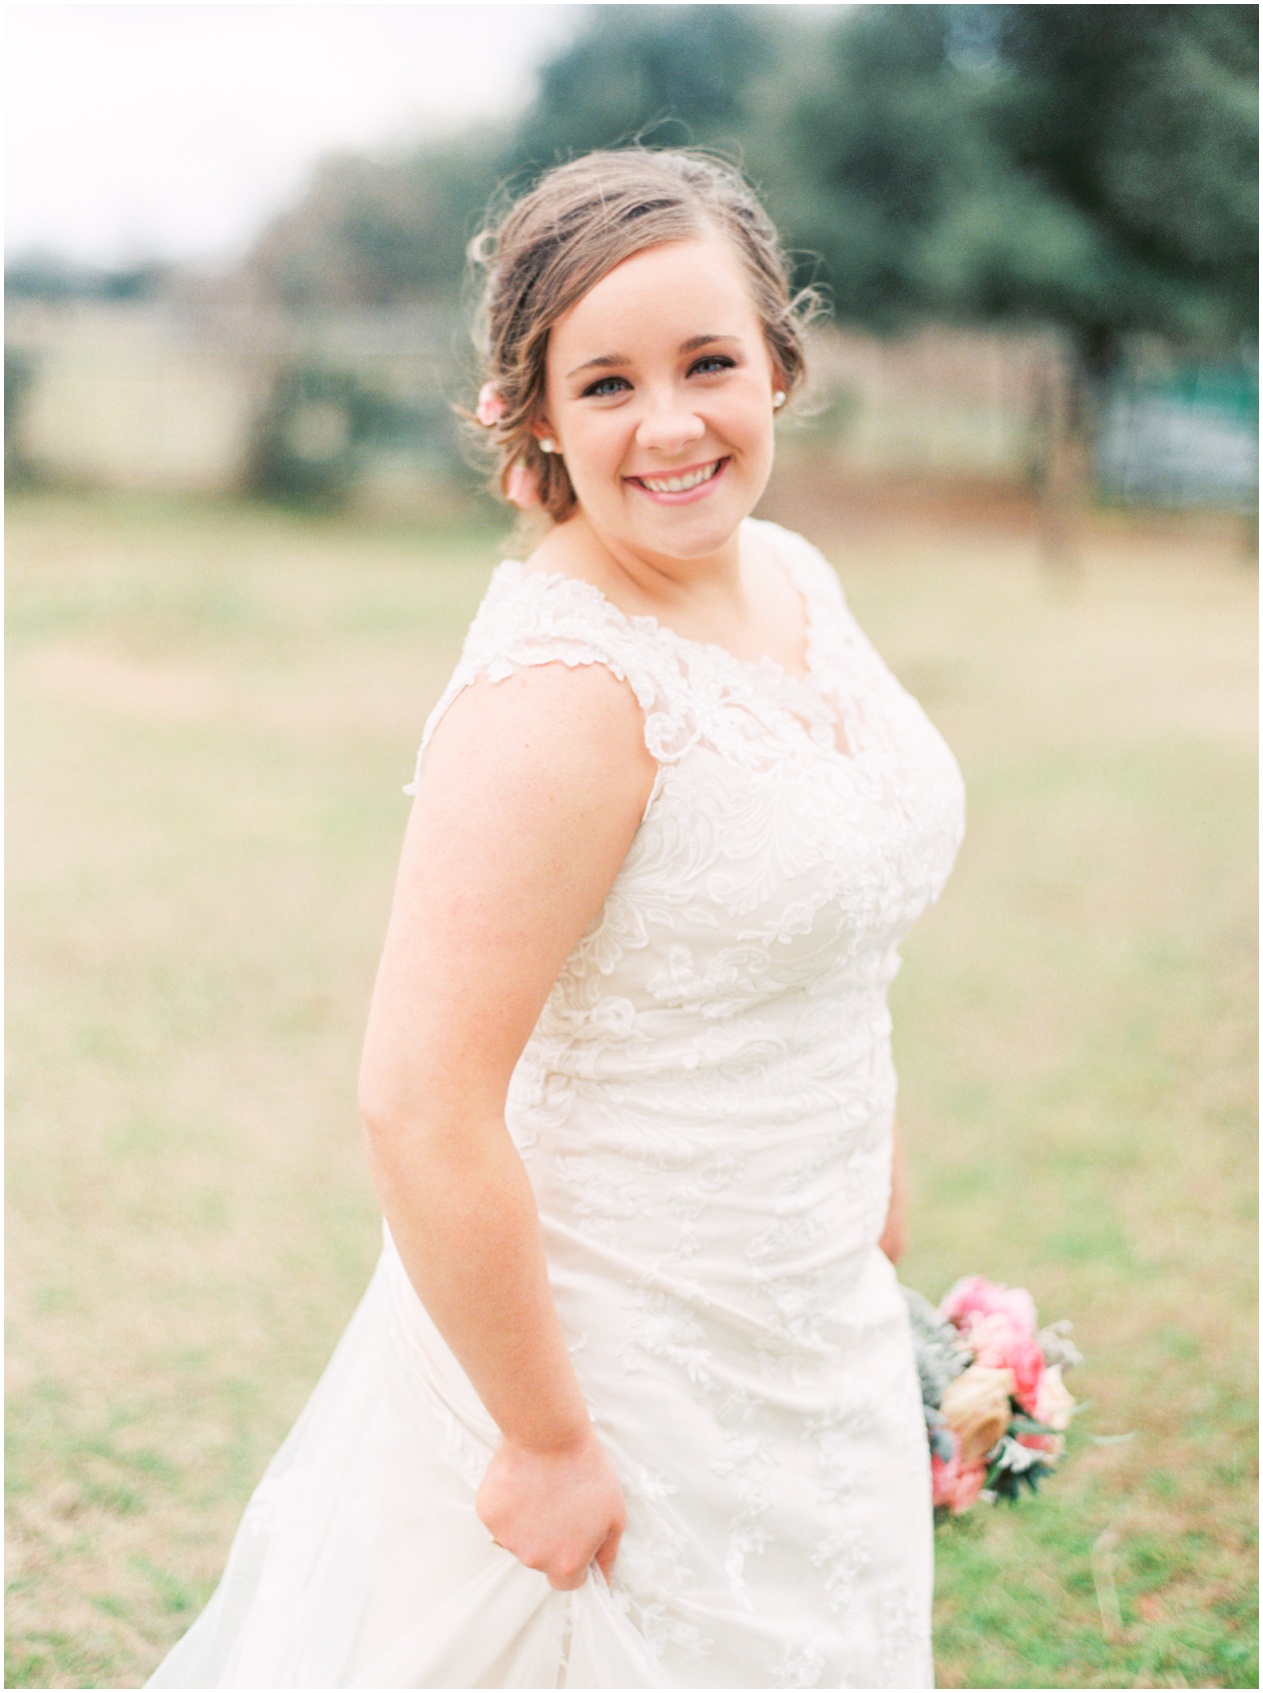 Sarah Best Photography - Claire's Bridals - The Amish Barn at Edge-19_STP.jpg